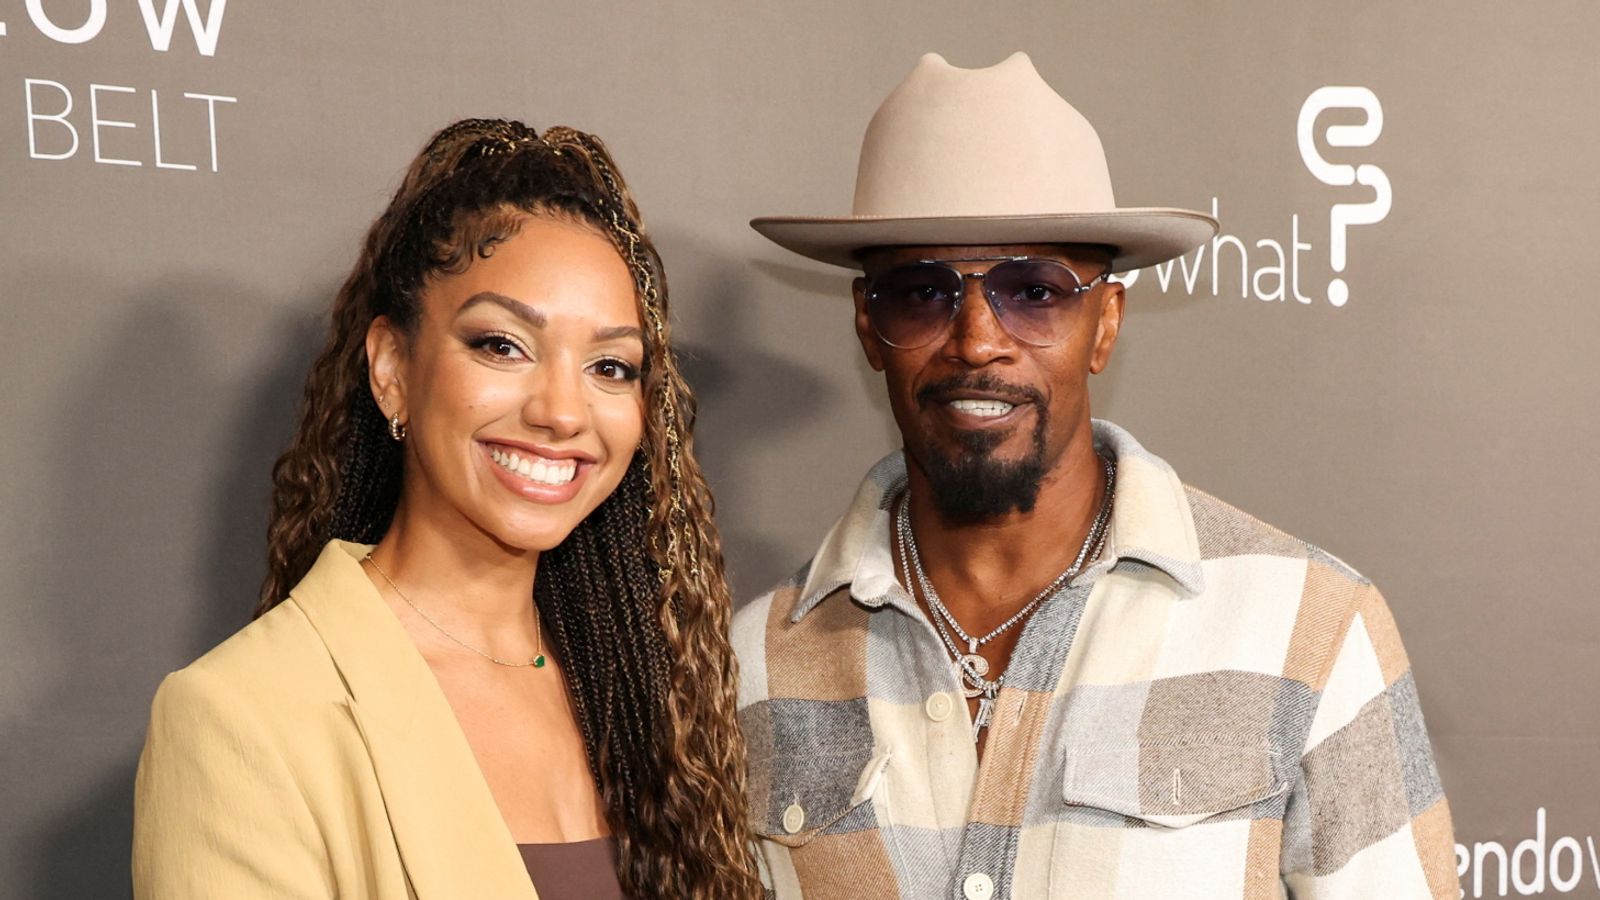 Jamie Foxx To Host New Game Show With Daughter Corinne After Leaving